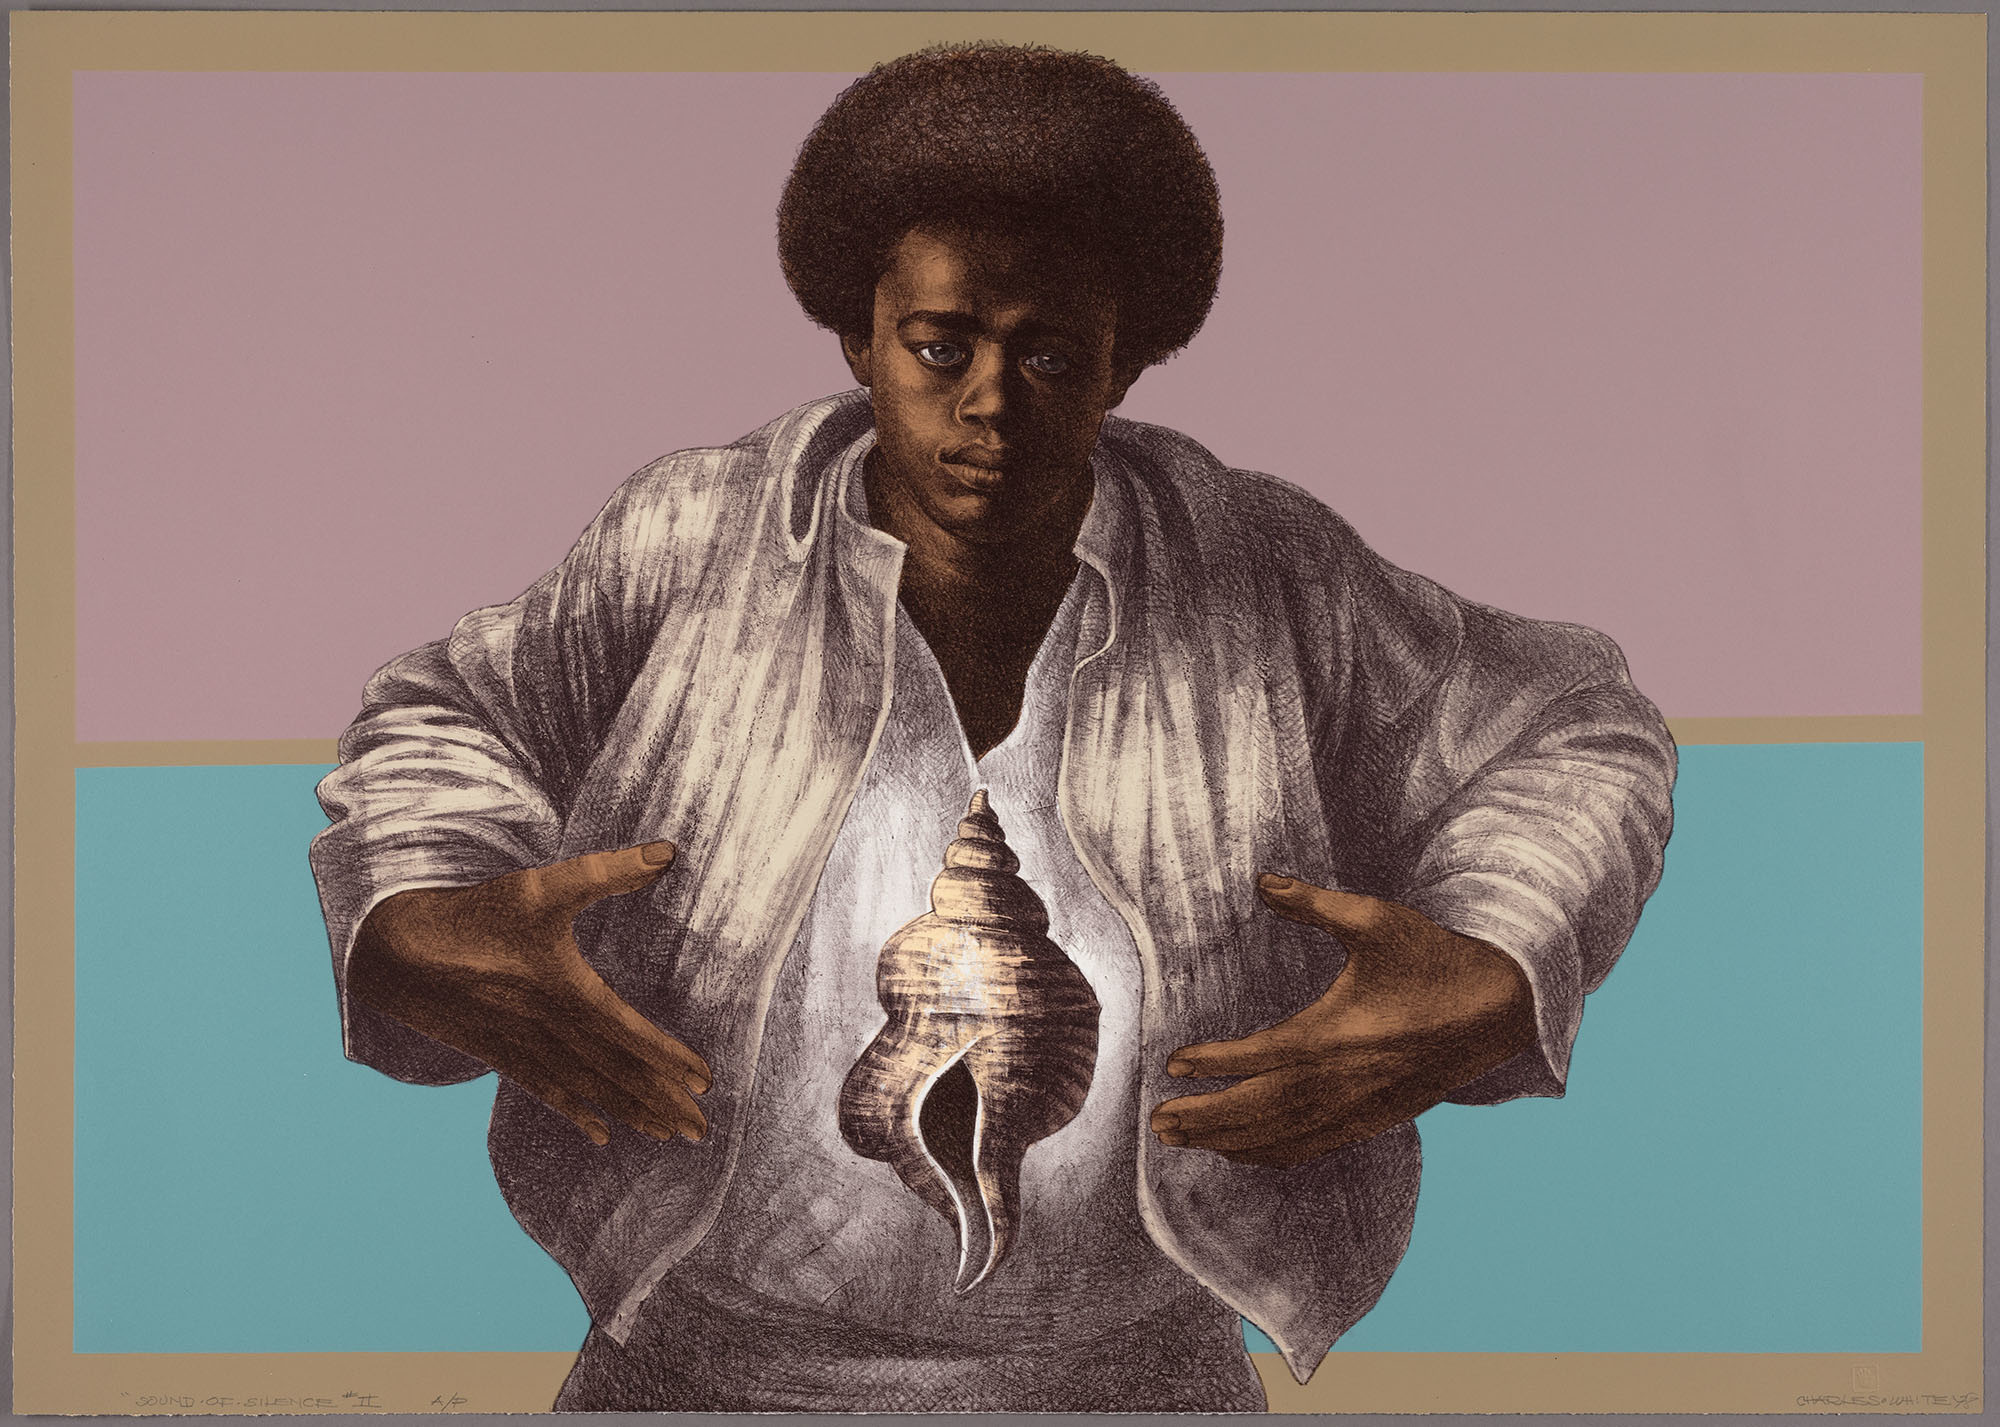 Charles White. Sound of Silence. 1978. Color lithograph on paper, 25 1/8 × 35 5/16" (63.8 × 89.7 cm). Publisher: Hand Graphics, Ltd. Printer: David Panosh. The Art Institute of Chicago. Margaret Fisher Fund. © 1978 The Charles White Archives